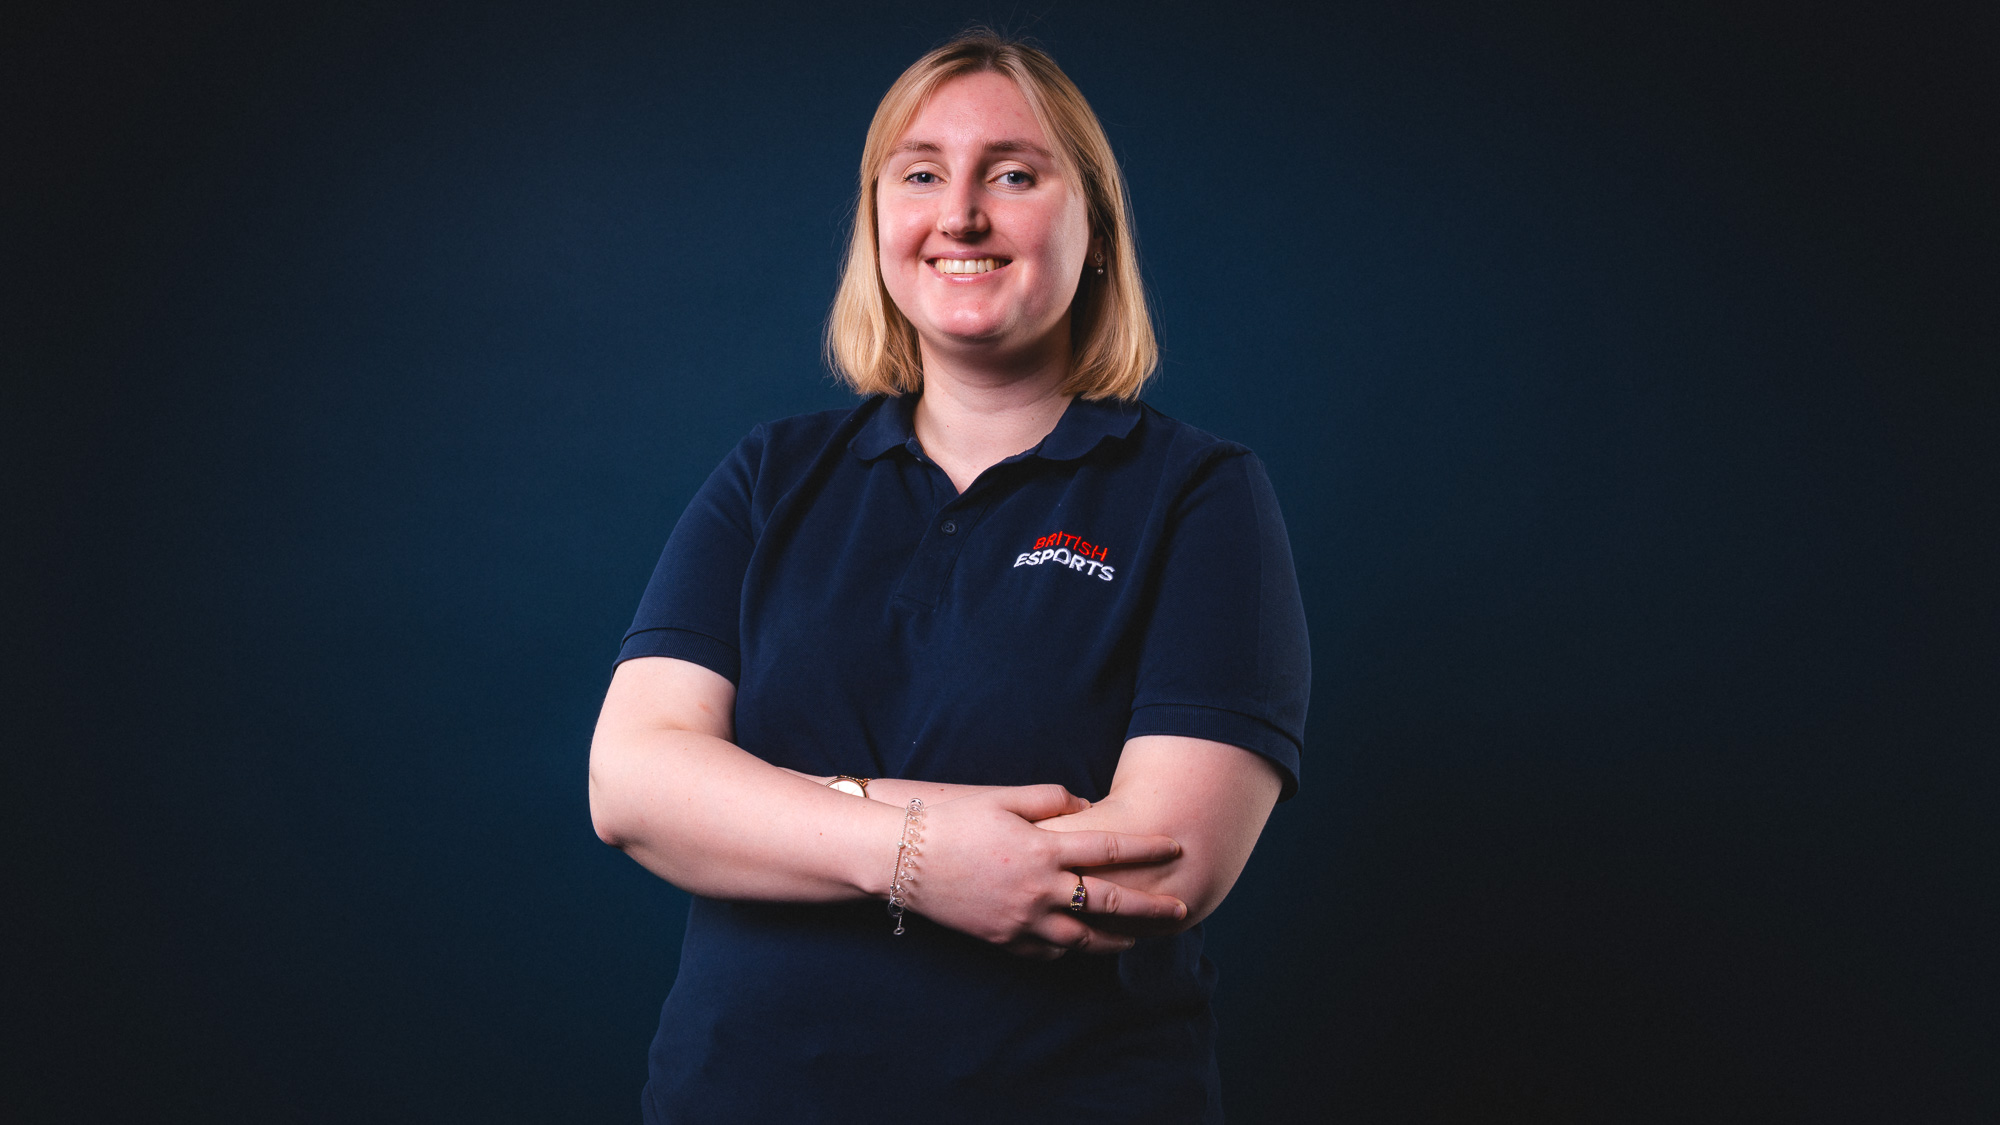 Alice Whorely, Head of Operations at the British Esports Federation